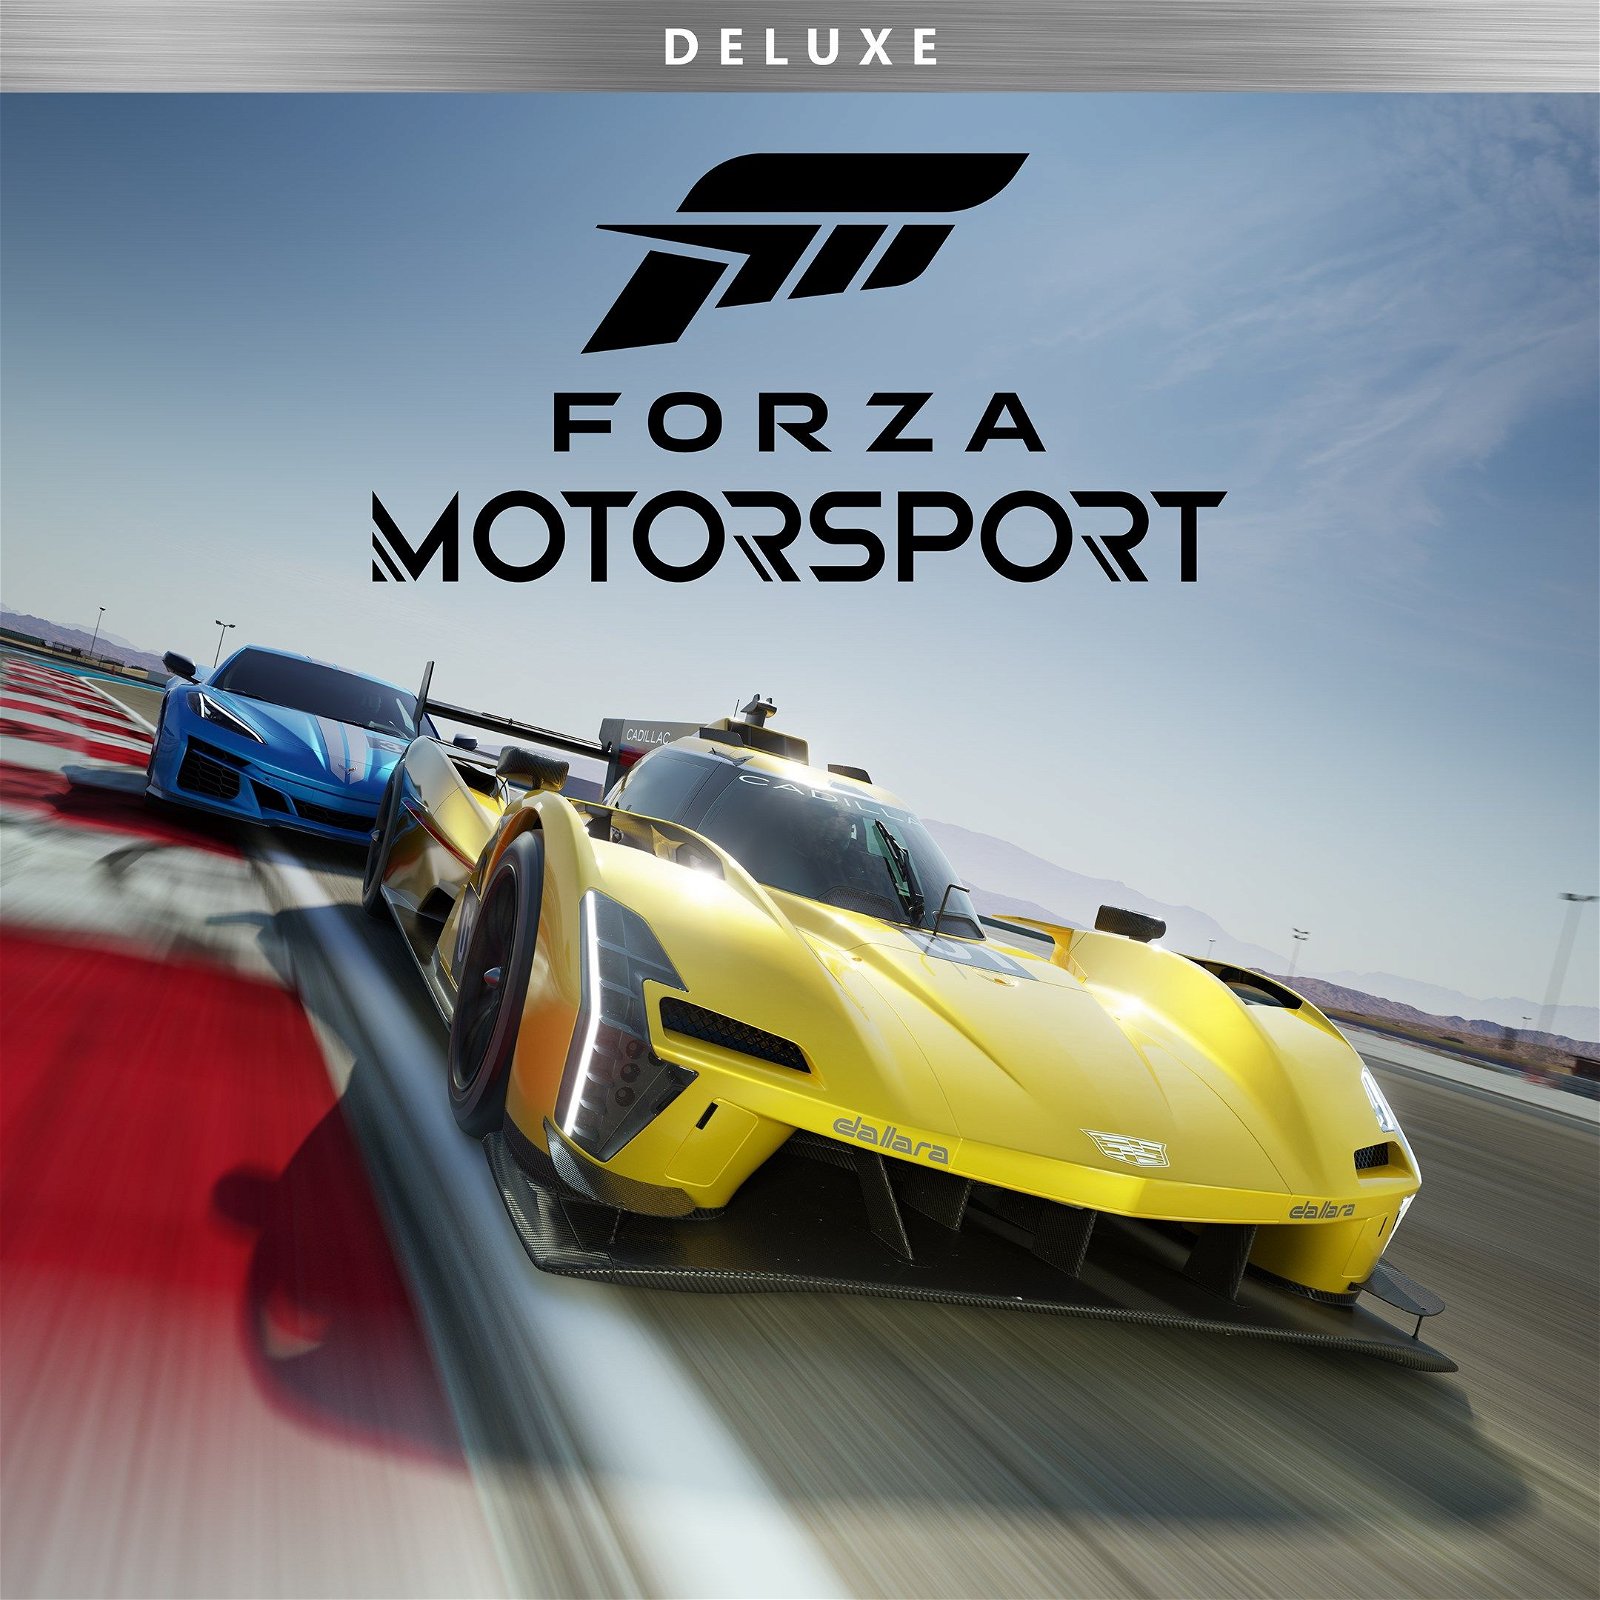 Image of Forza Motorsport Deluxe Edition